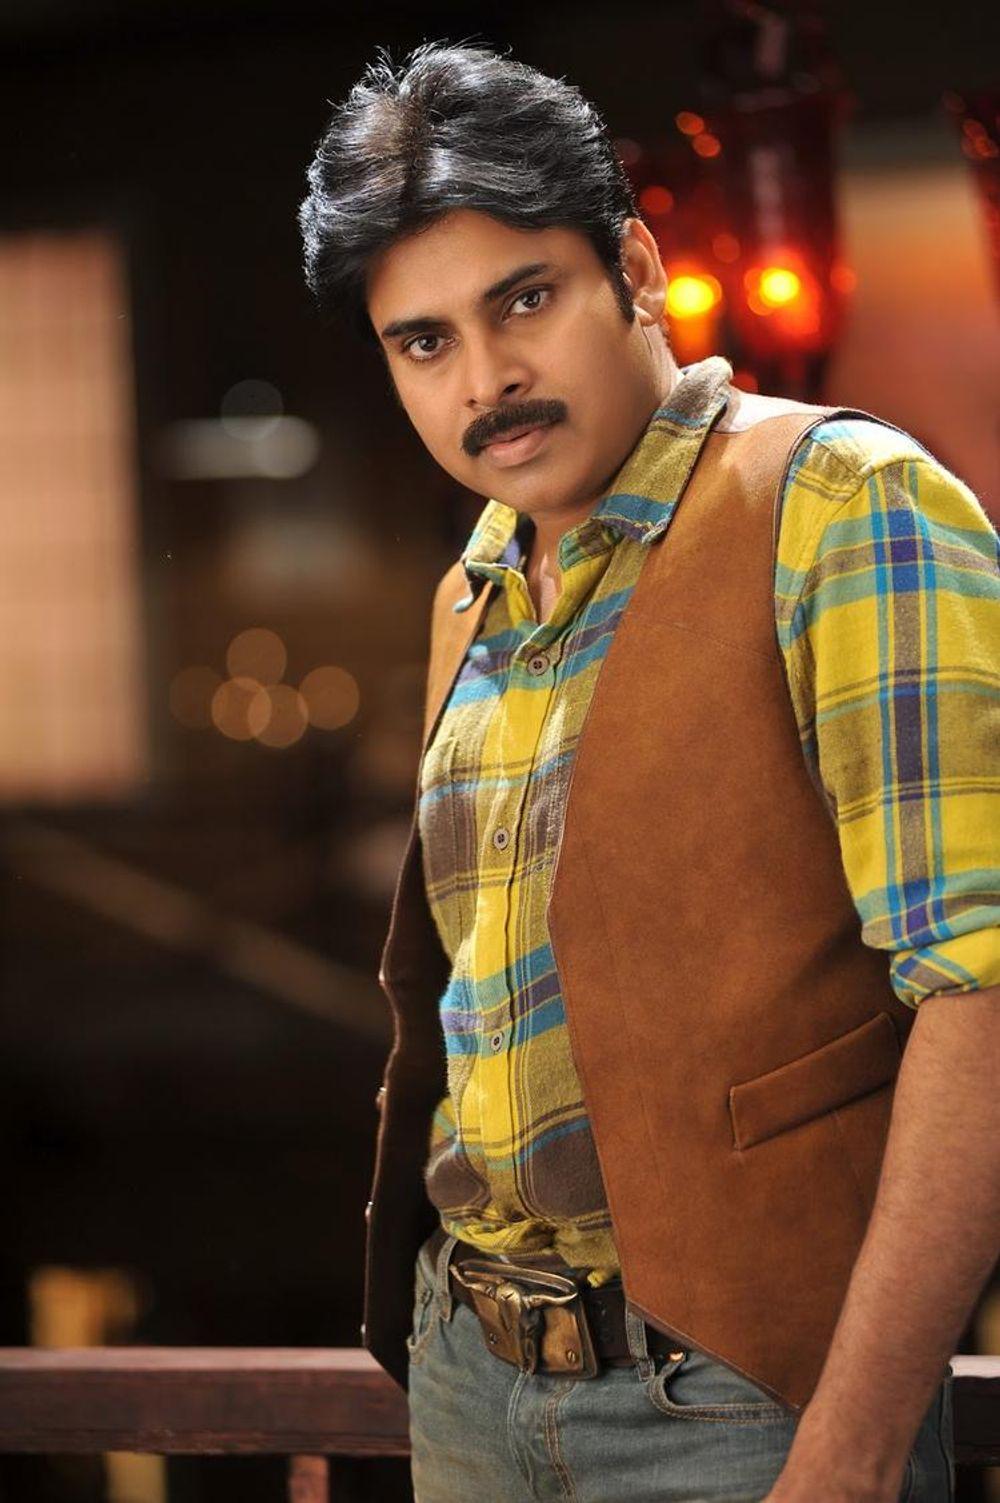 Pawan Kalyan, known as 'Power Star,' is a versatile personality with roles ranging from actor, director, and screenwriter to stunt coordinator, philanthropist, and politician. Debuting in the 1996 Telugu film 'Akkada Ammayi Ikkada Abbayi,' he gained fame through hits like 'Kushi,' a significant milestone in the early 2000s. Despite career fluctuations, his star stature remains robust. In 2014, he entered politics, establishing the Jana Sena Party. On the personal front, Kalyan's marital journey includes Nandini (1997-2007), Renu Desai (2009-2012), and Anna Lezhneva (since 2013). His children include Akira Nandan and Aadya with Renu Desai, along with Polena Anjana Pawanovna and Mark Shankar Pawanovich with Anna Lezhneva.